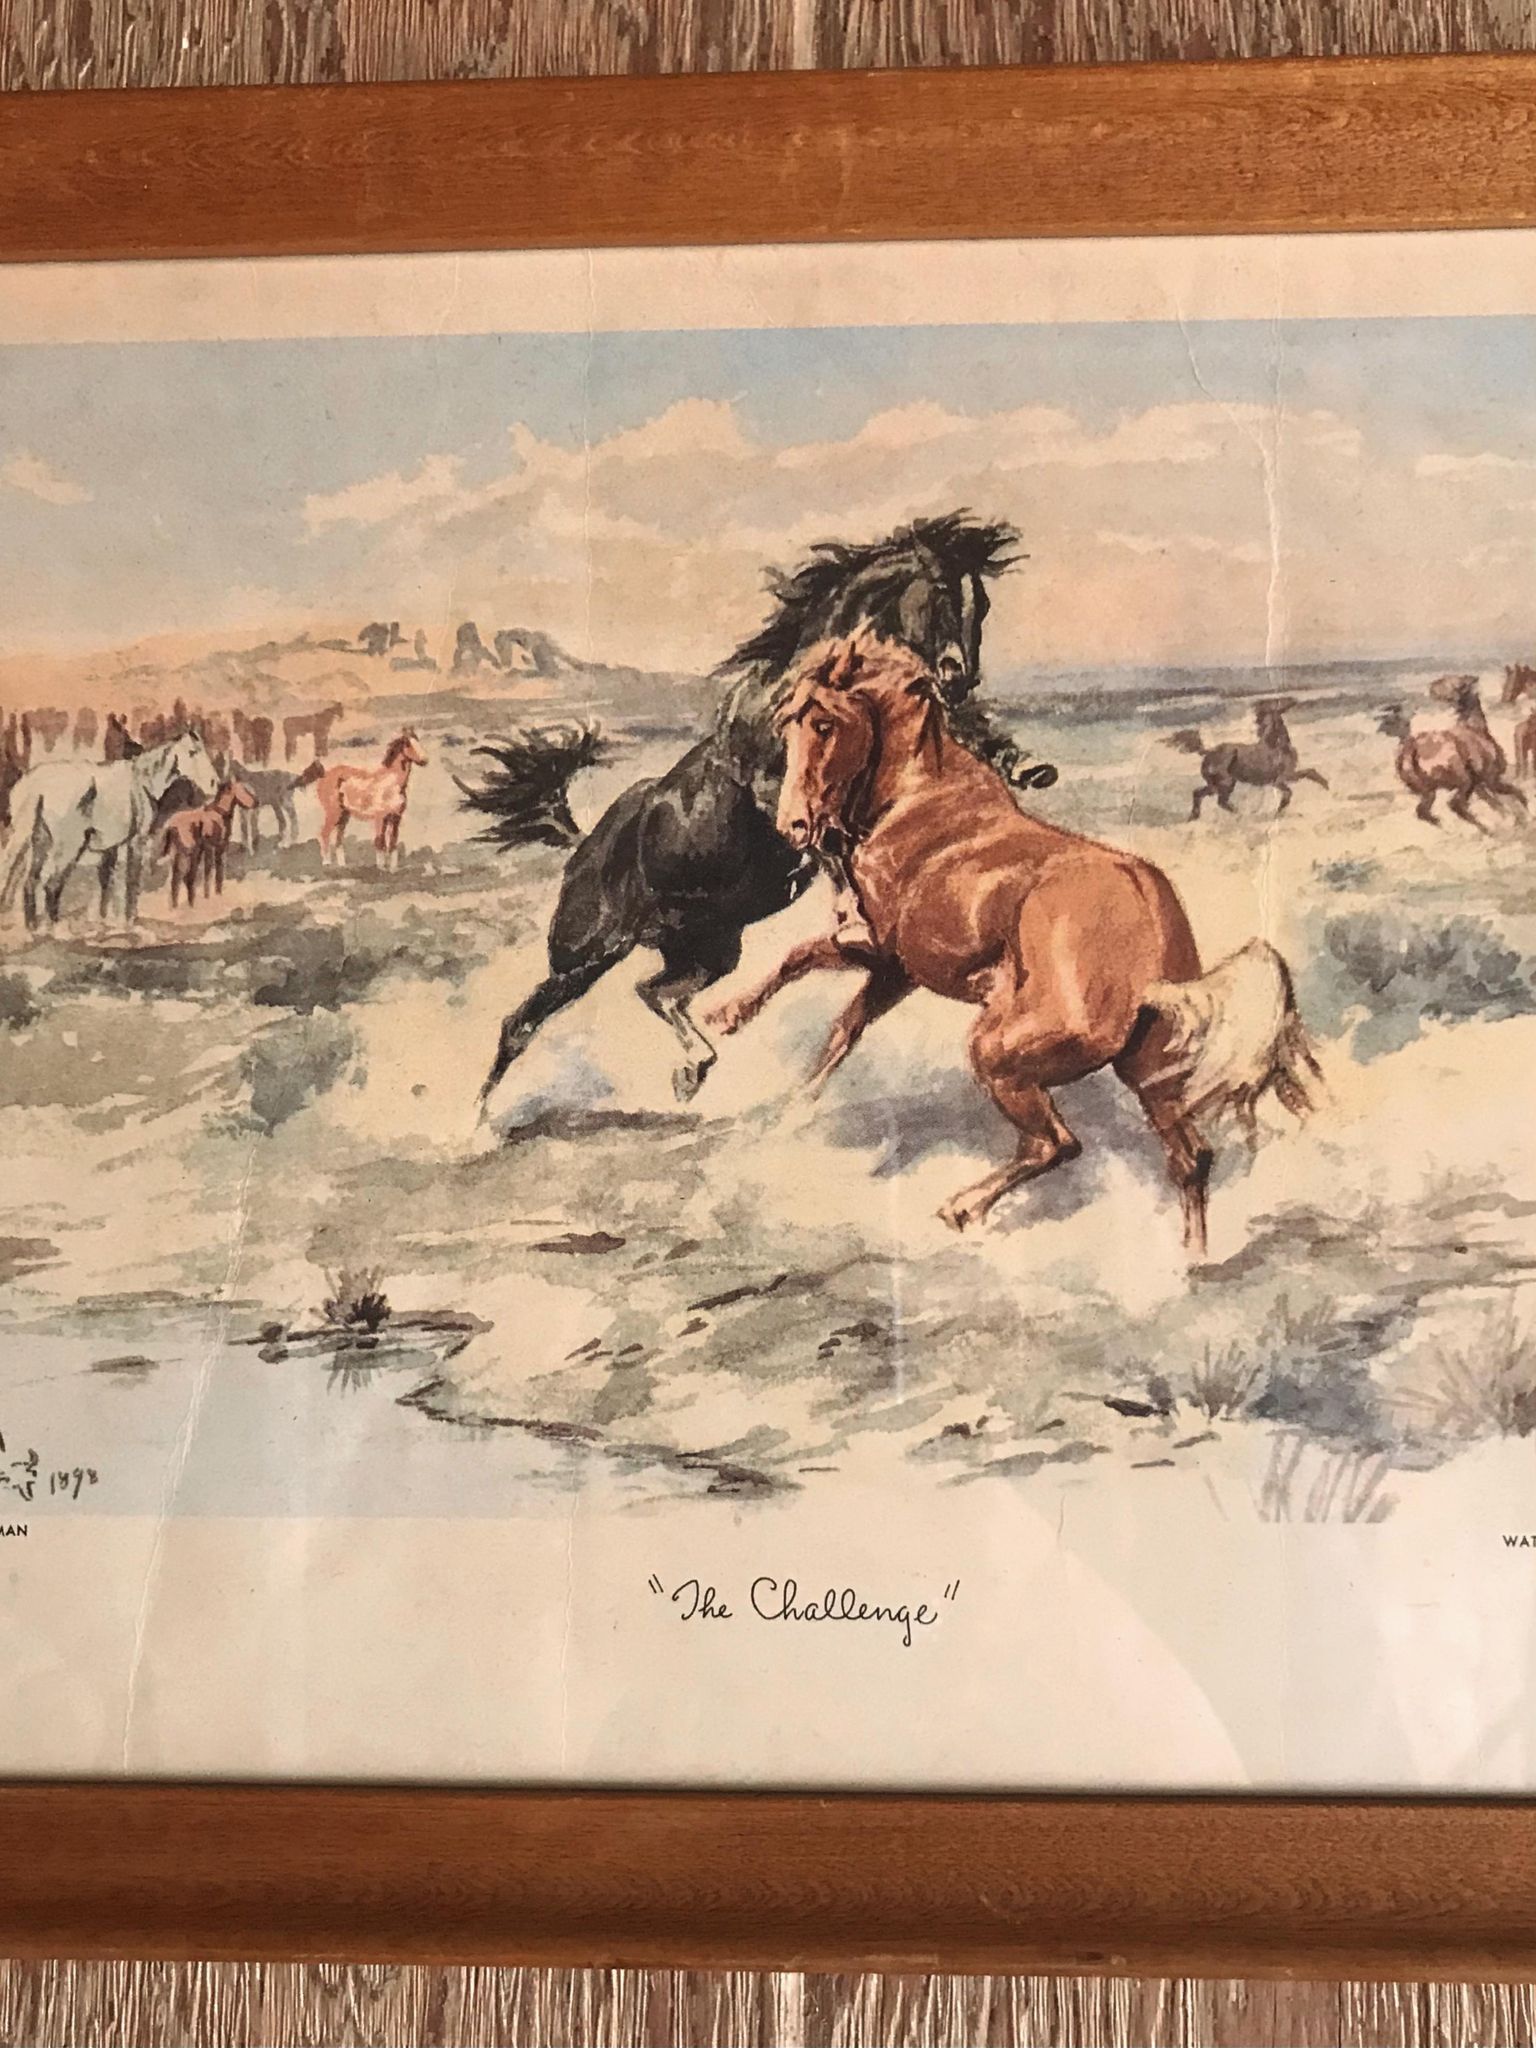 Charles Russell Print "The Challenge"